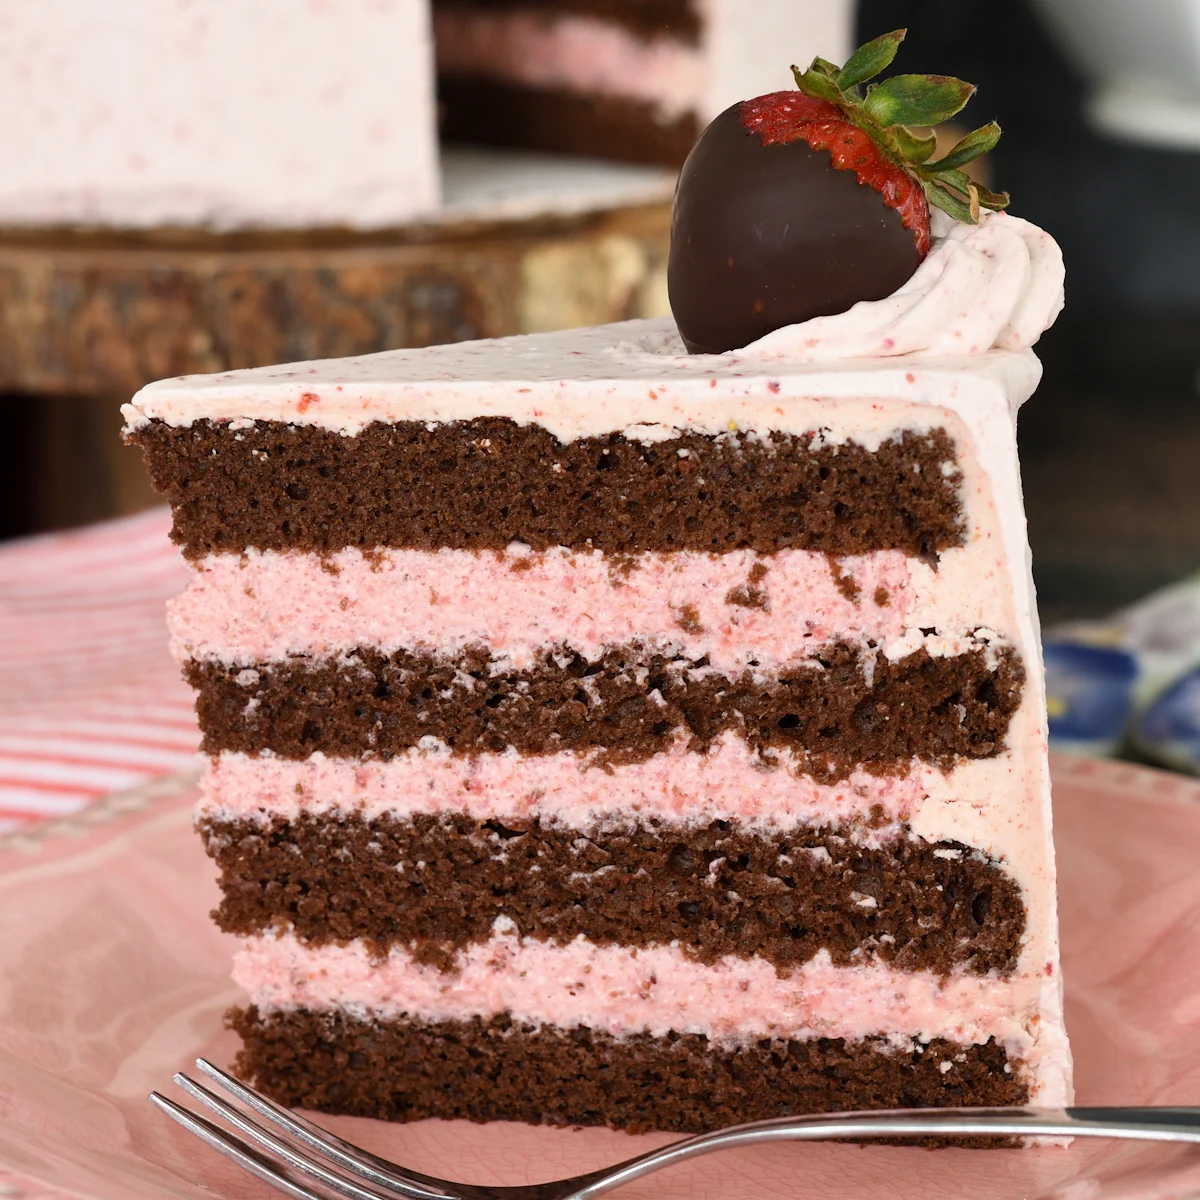 Chocolate Cake with Strawberry Mousse FIlling